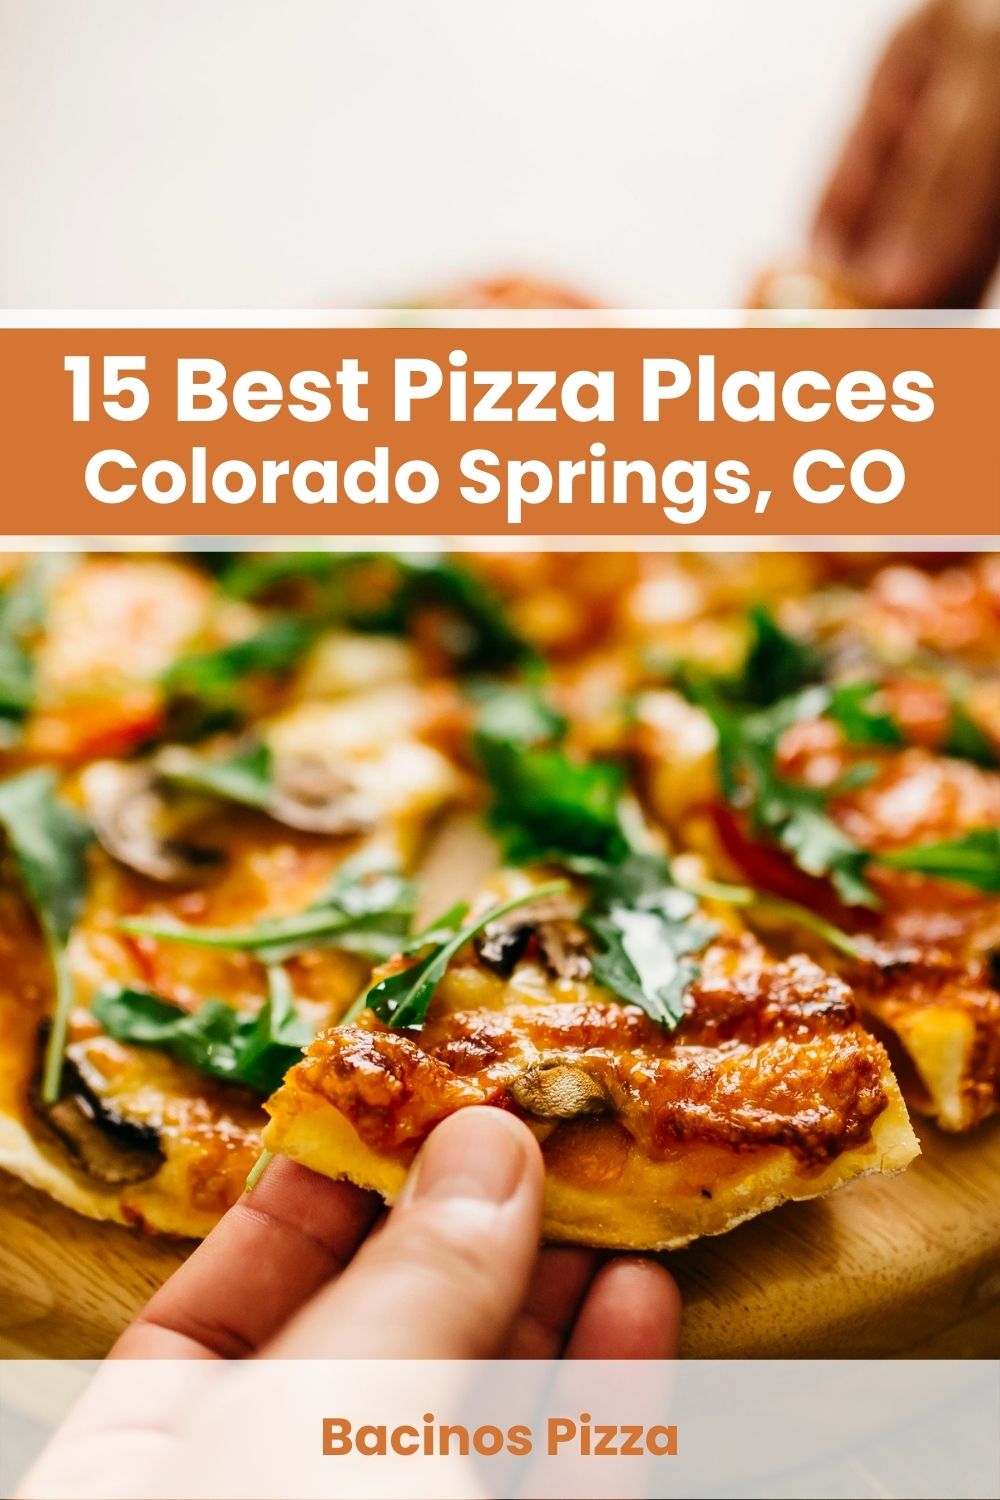 Best Pizza Places in Colorado Springs